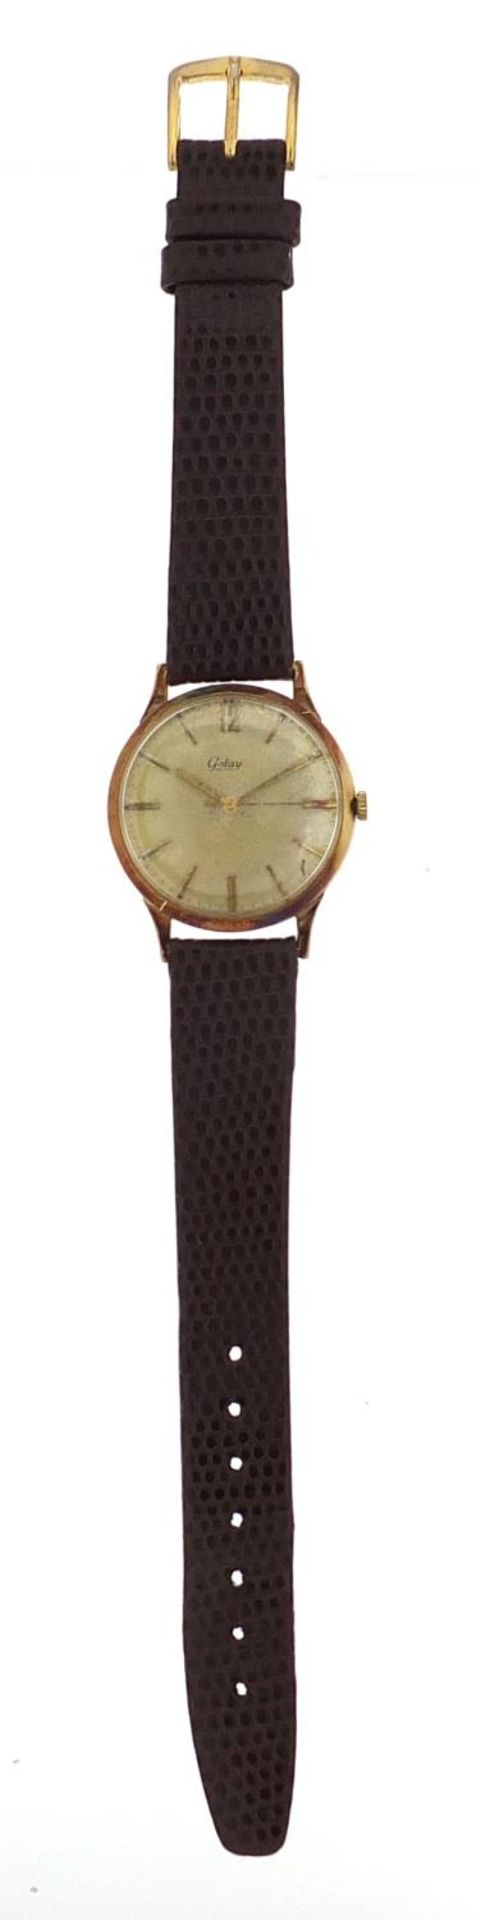 Golay, gentlemen's 9ct gold wristwatch, the case numbered 53238, 32mm in diameter - Image 2 of 5